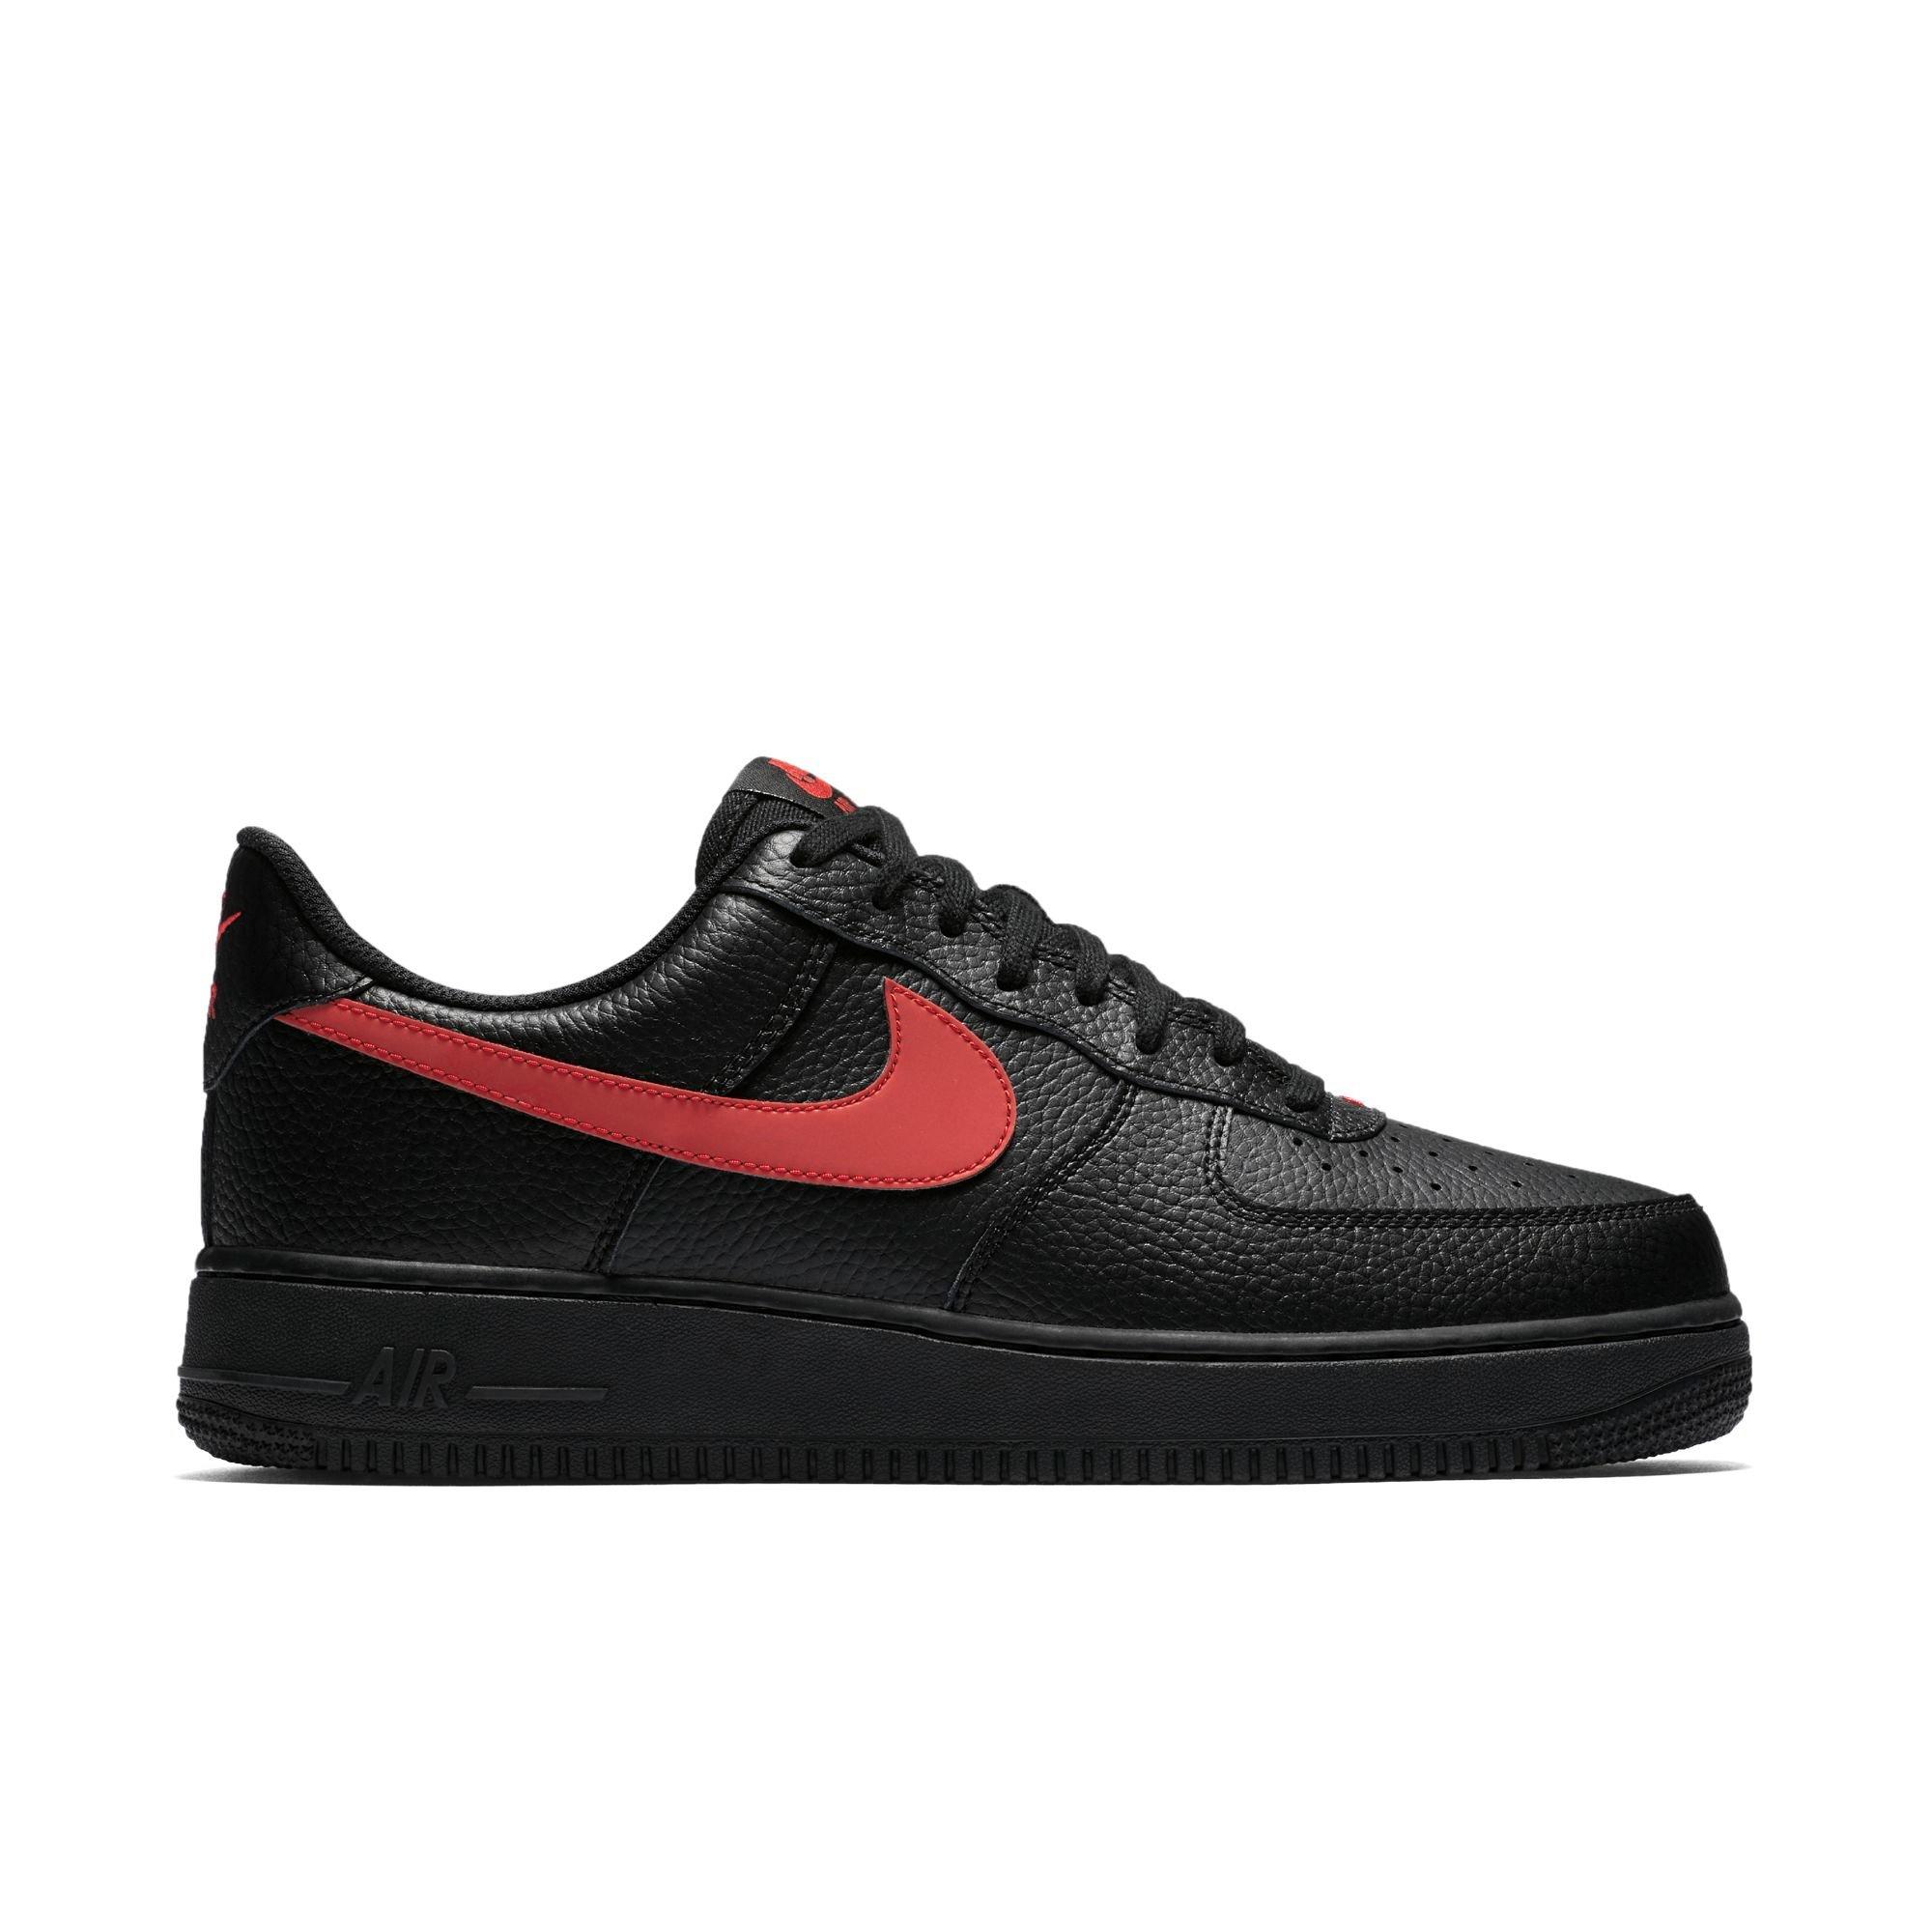 red and black low top air force ones